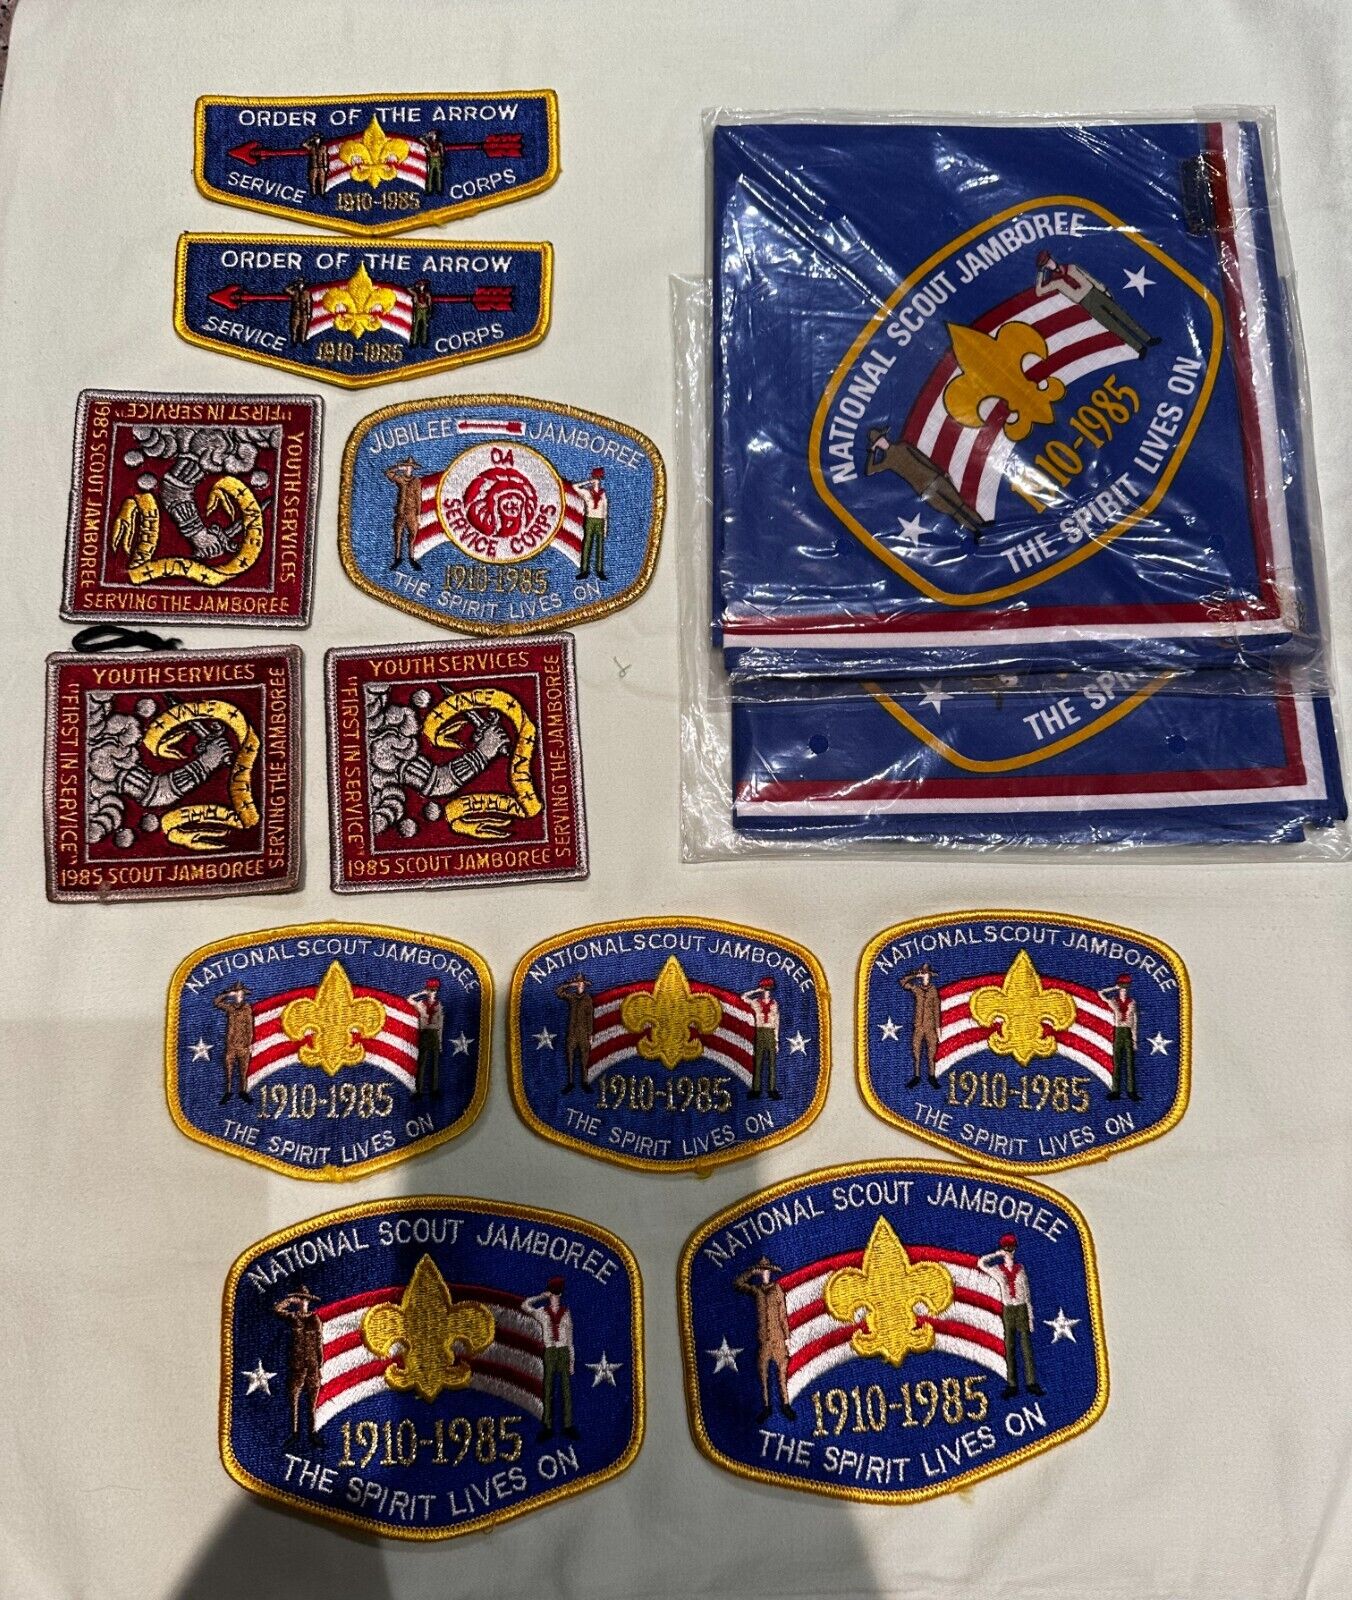 1985 National Boy Scout Jamboree Patches